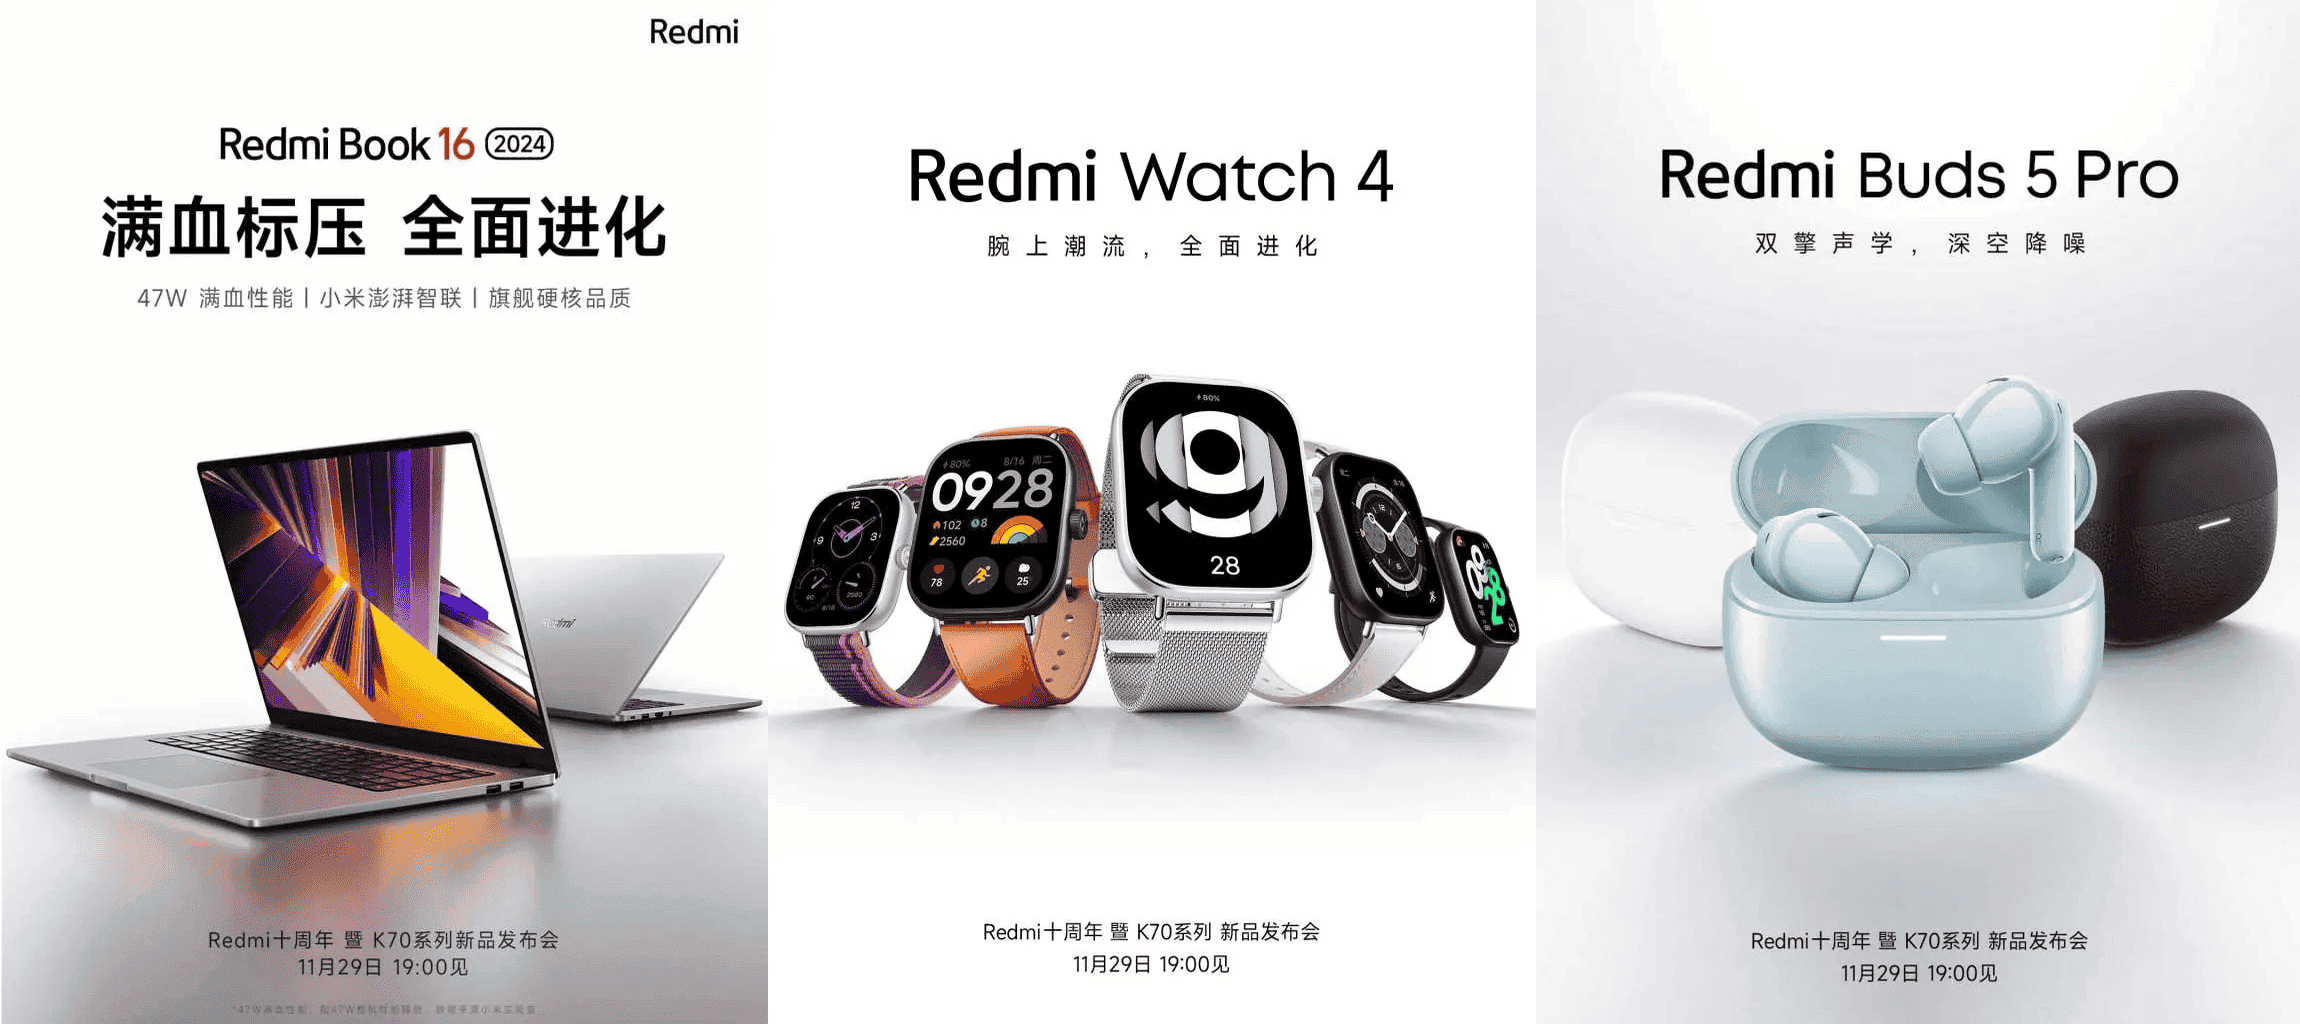 Redmi Buds 5 Pro And Redmi Watch 4 Official Now